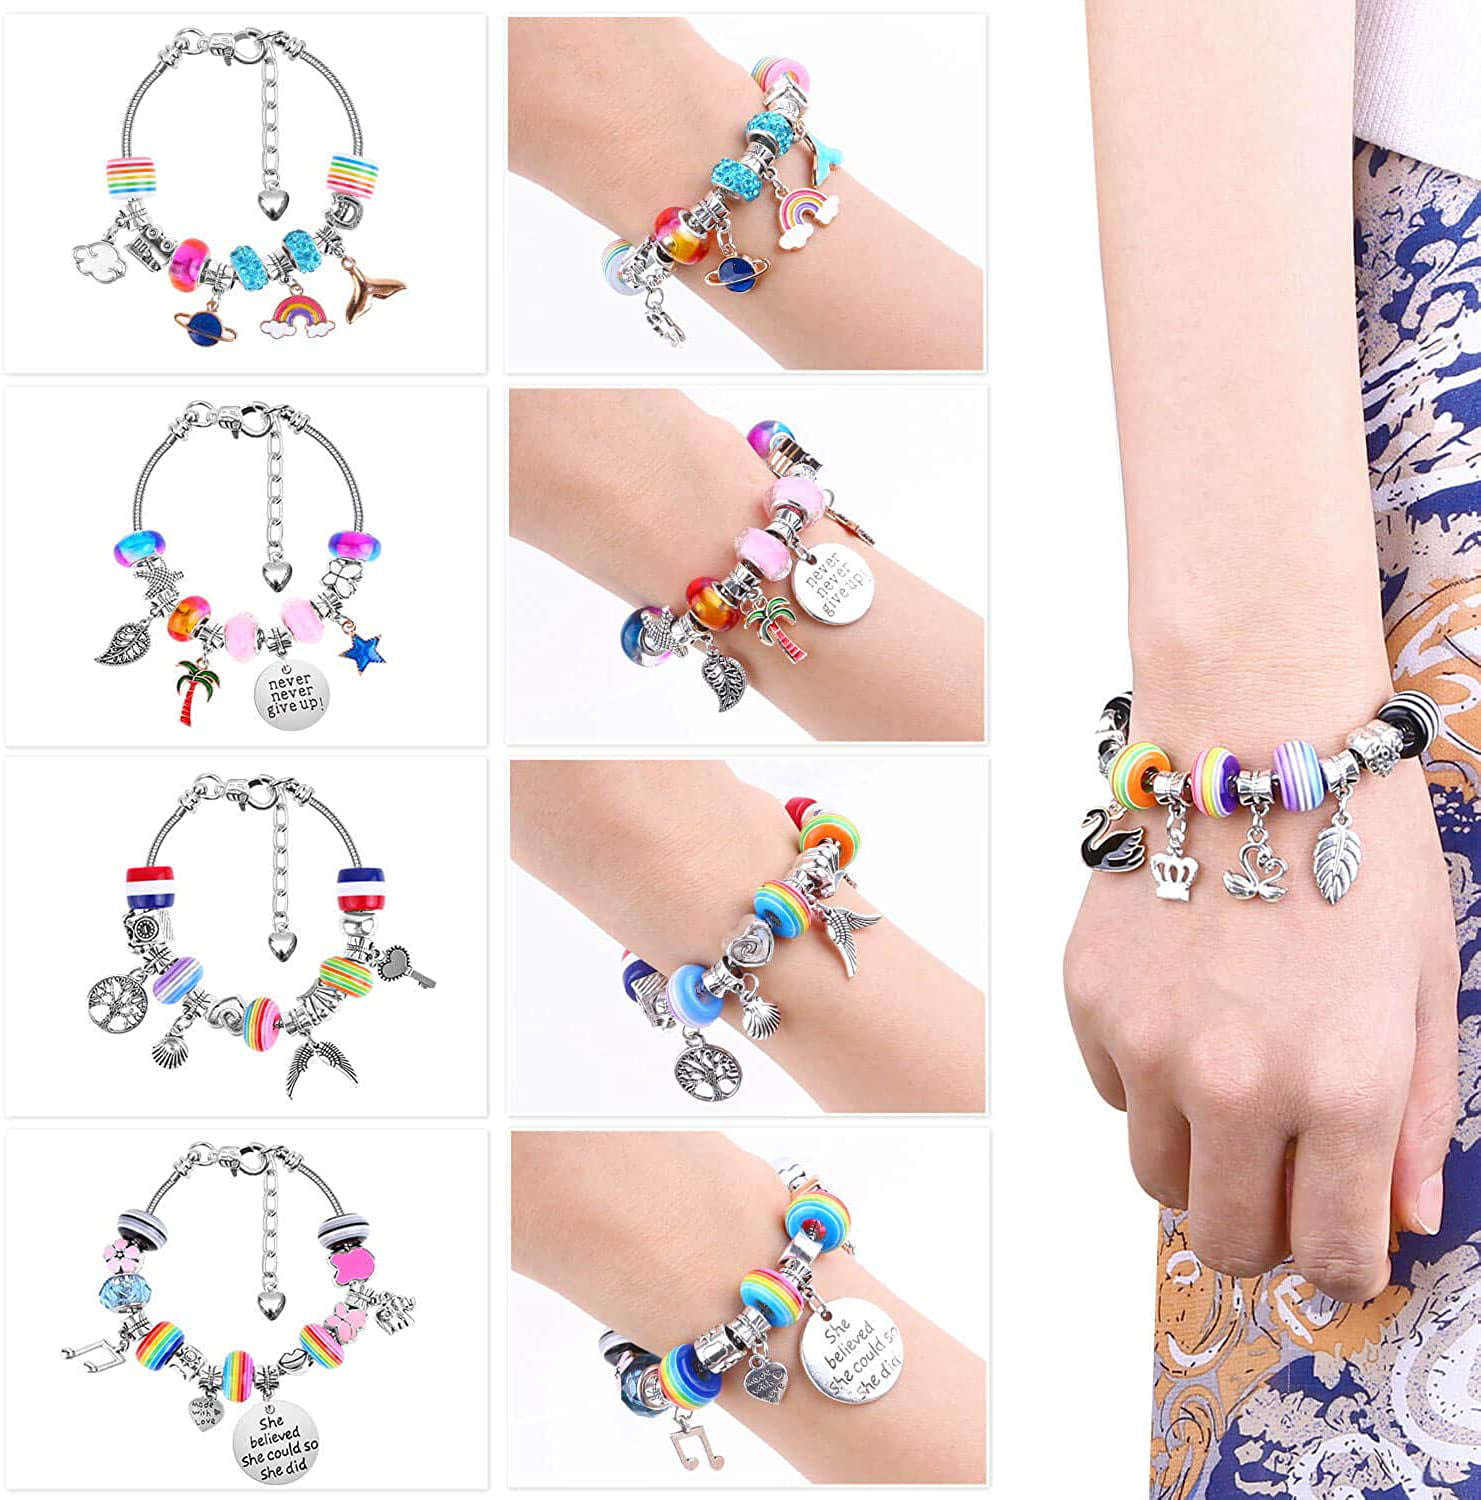 83PCS Charm Bracelet Jewelry Making Kit with Beads,Jewelry Charms for Teen  Girls